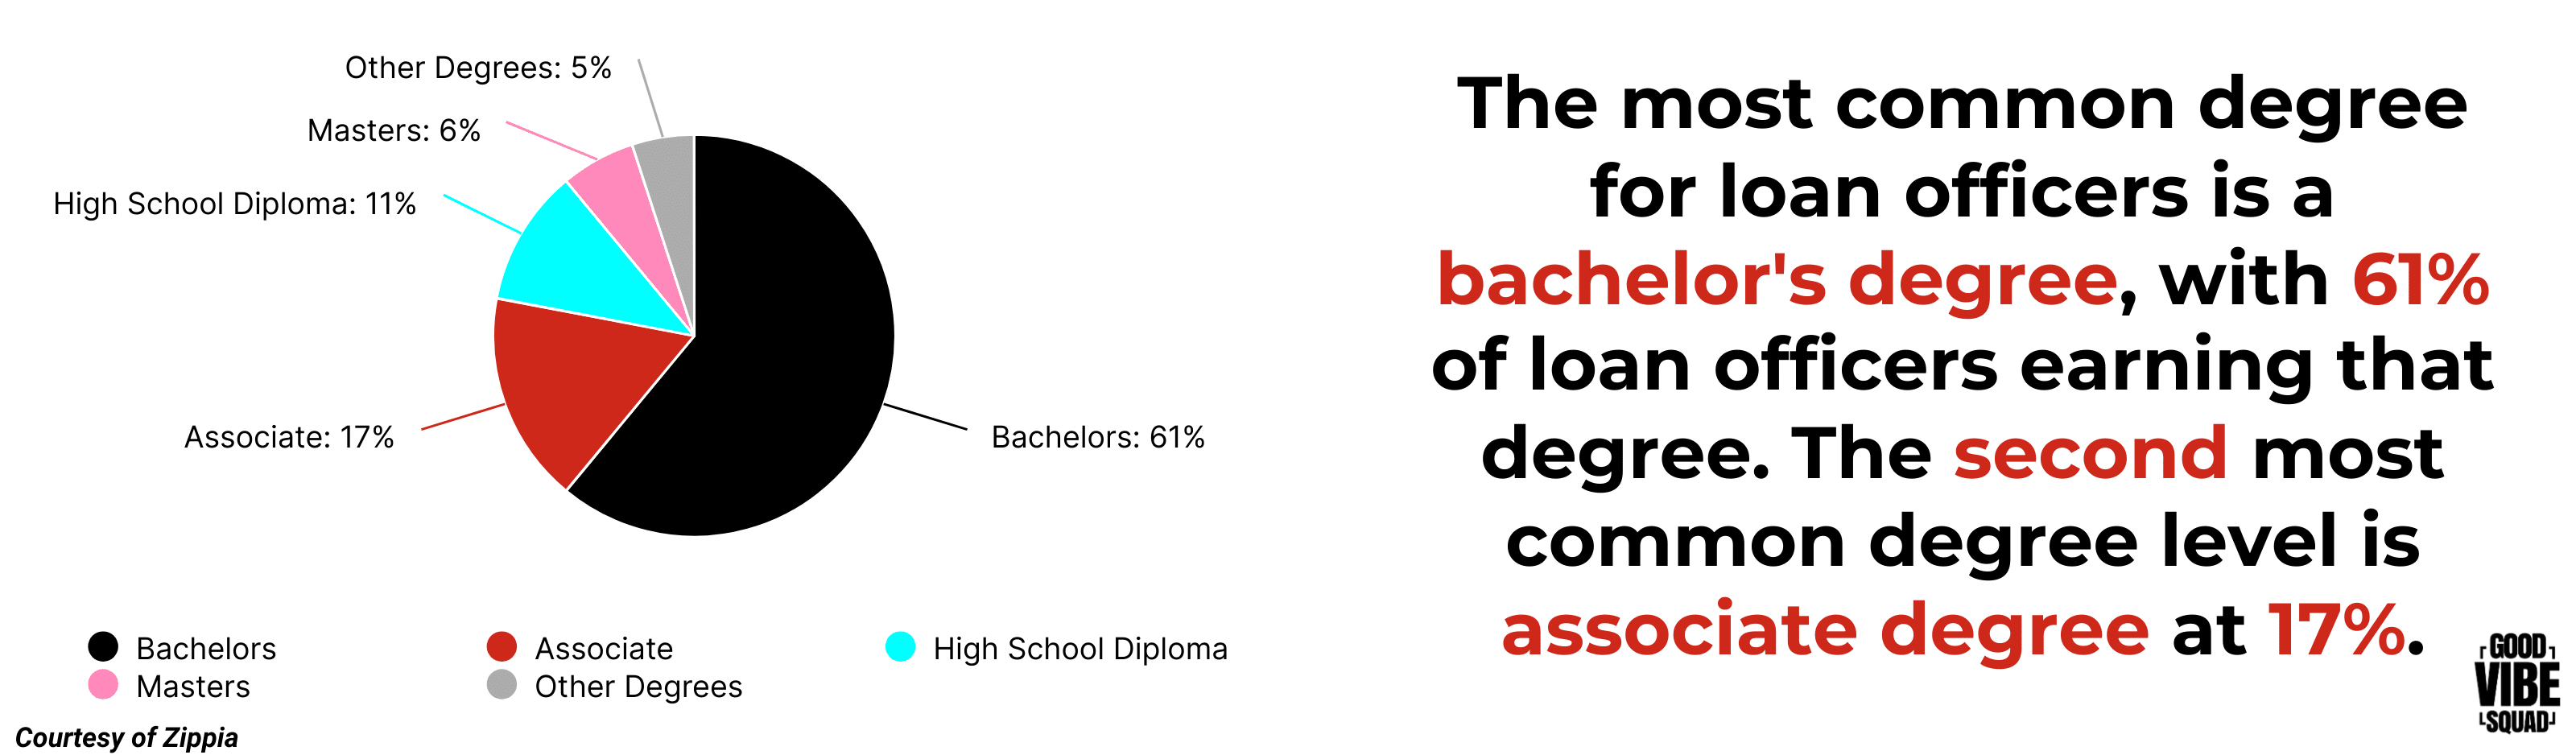 average-education-level-of-loan-officers